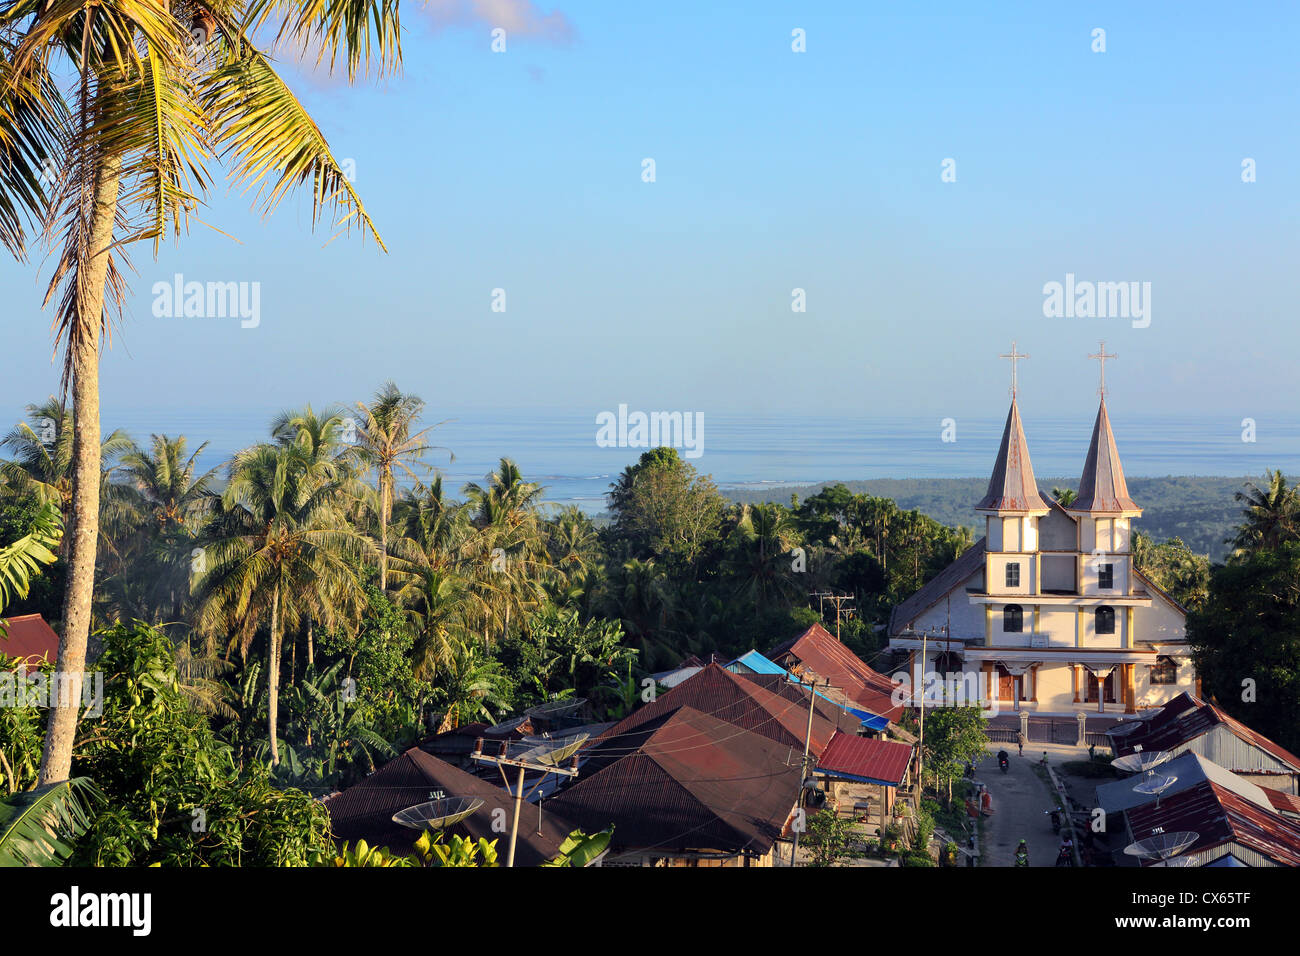 View of the Indian Ocean from Bawomataluo village on Nias Island in North Sumatra. Stock Photo